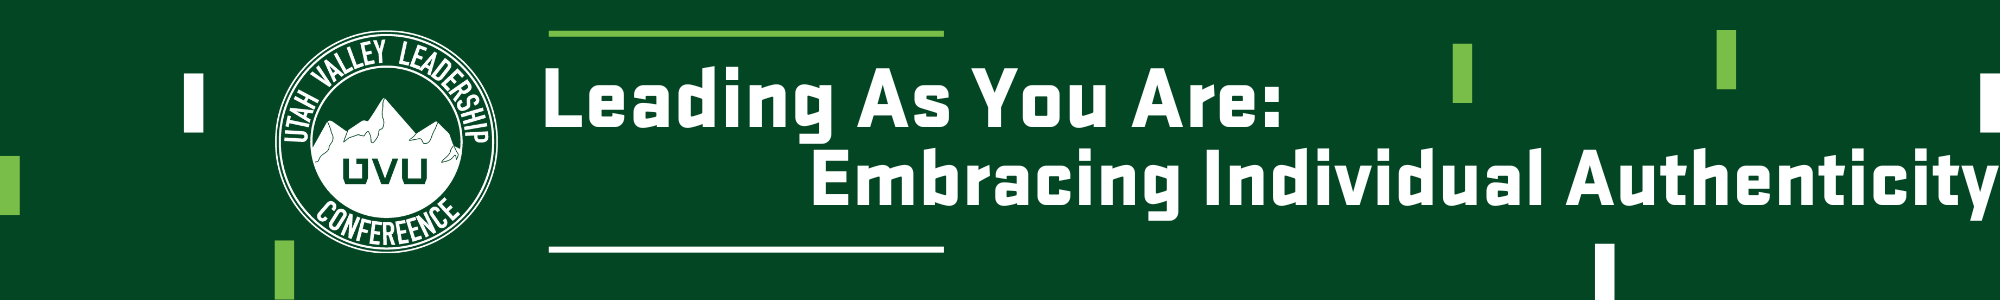 A banner with the text "Leading as you are: Embracing individual authenticity"